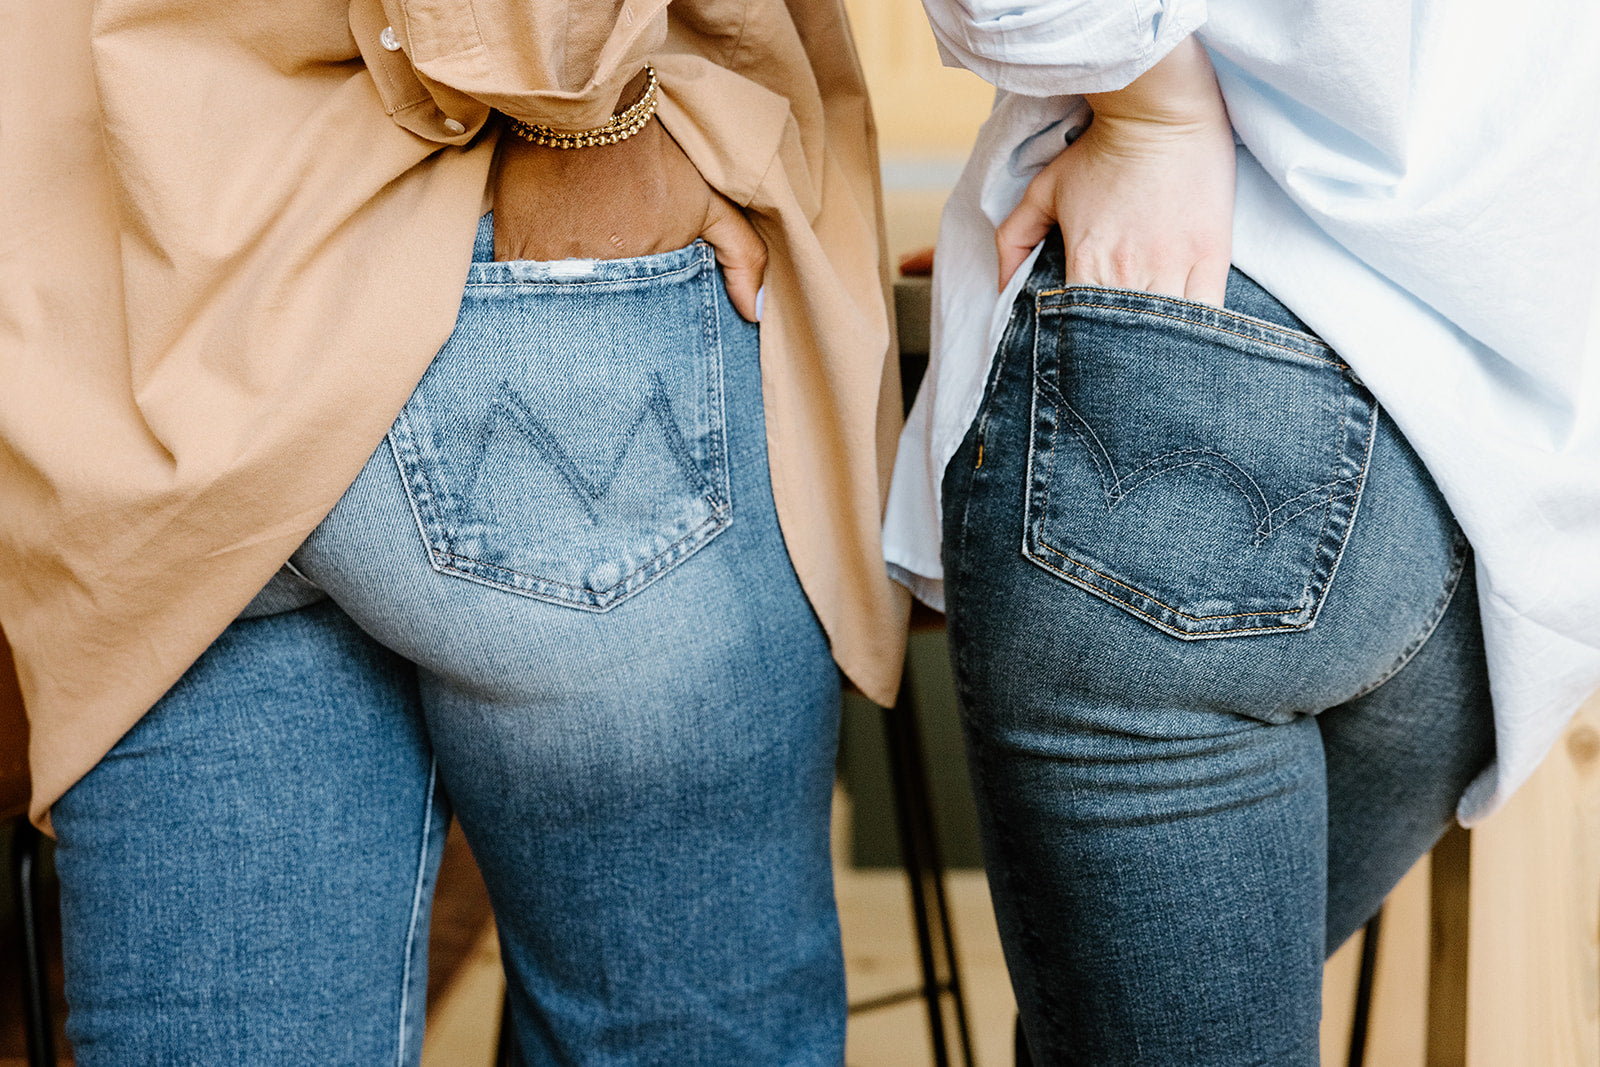 Two people standing close together, each with a hand in their respective denim back pockets.